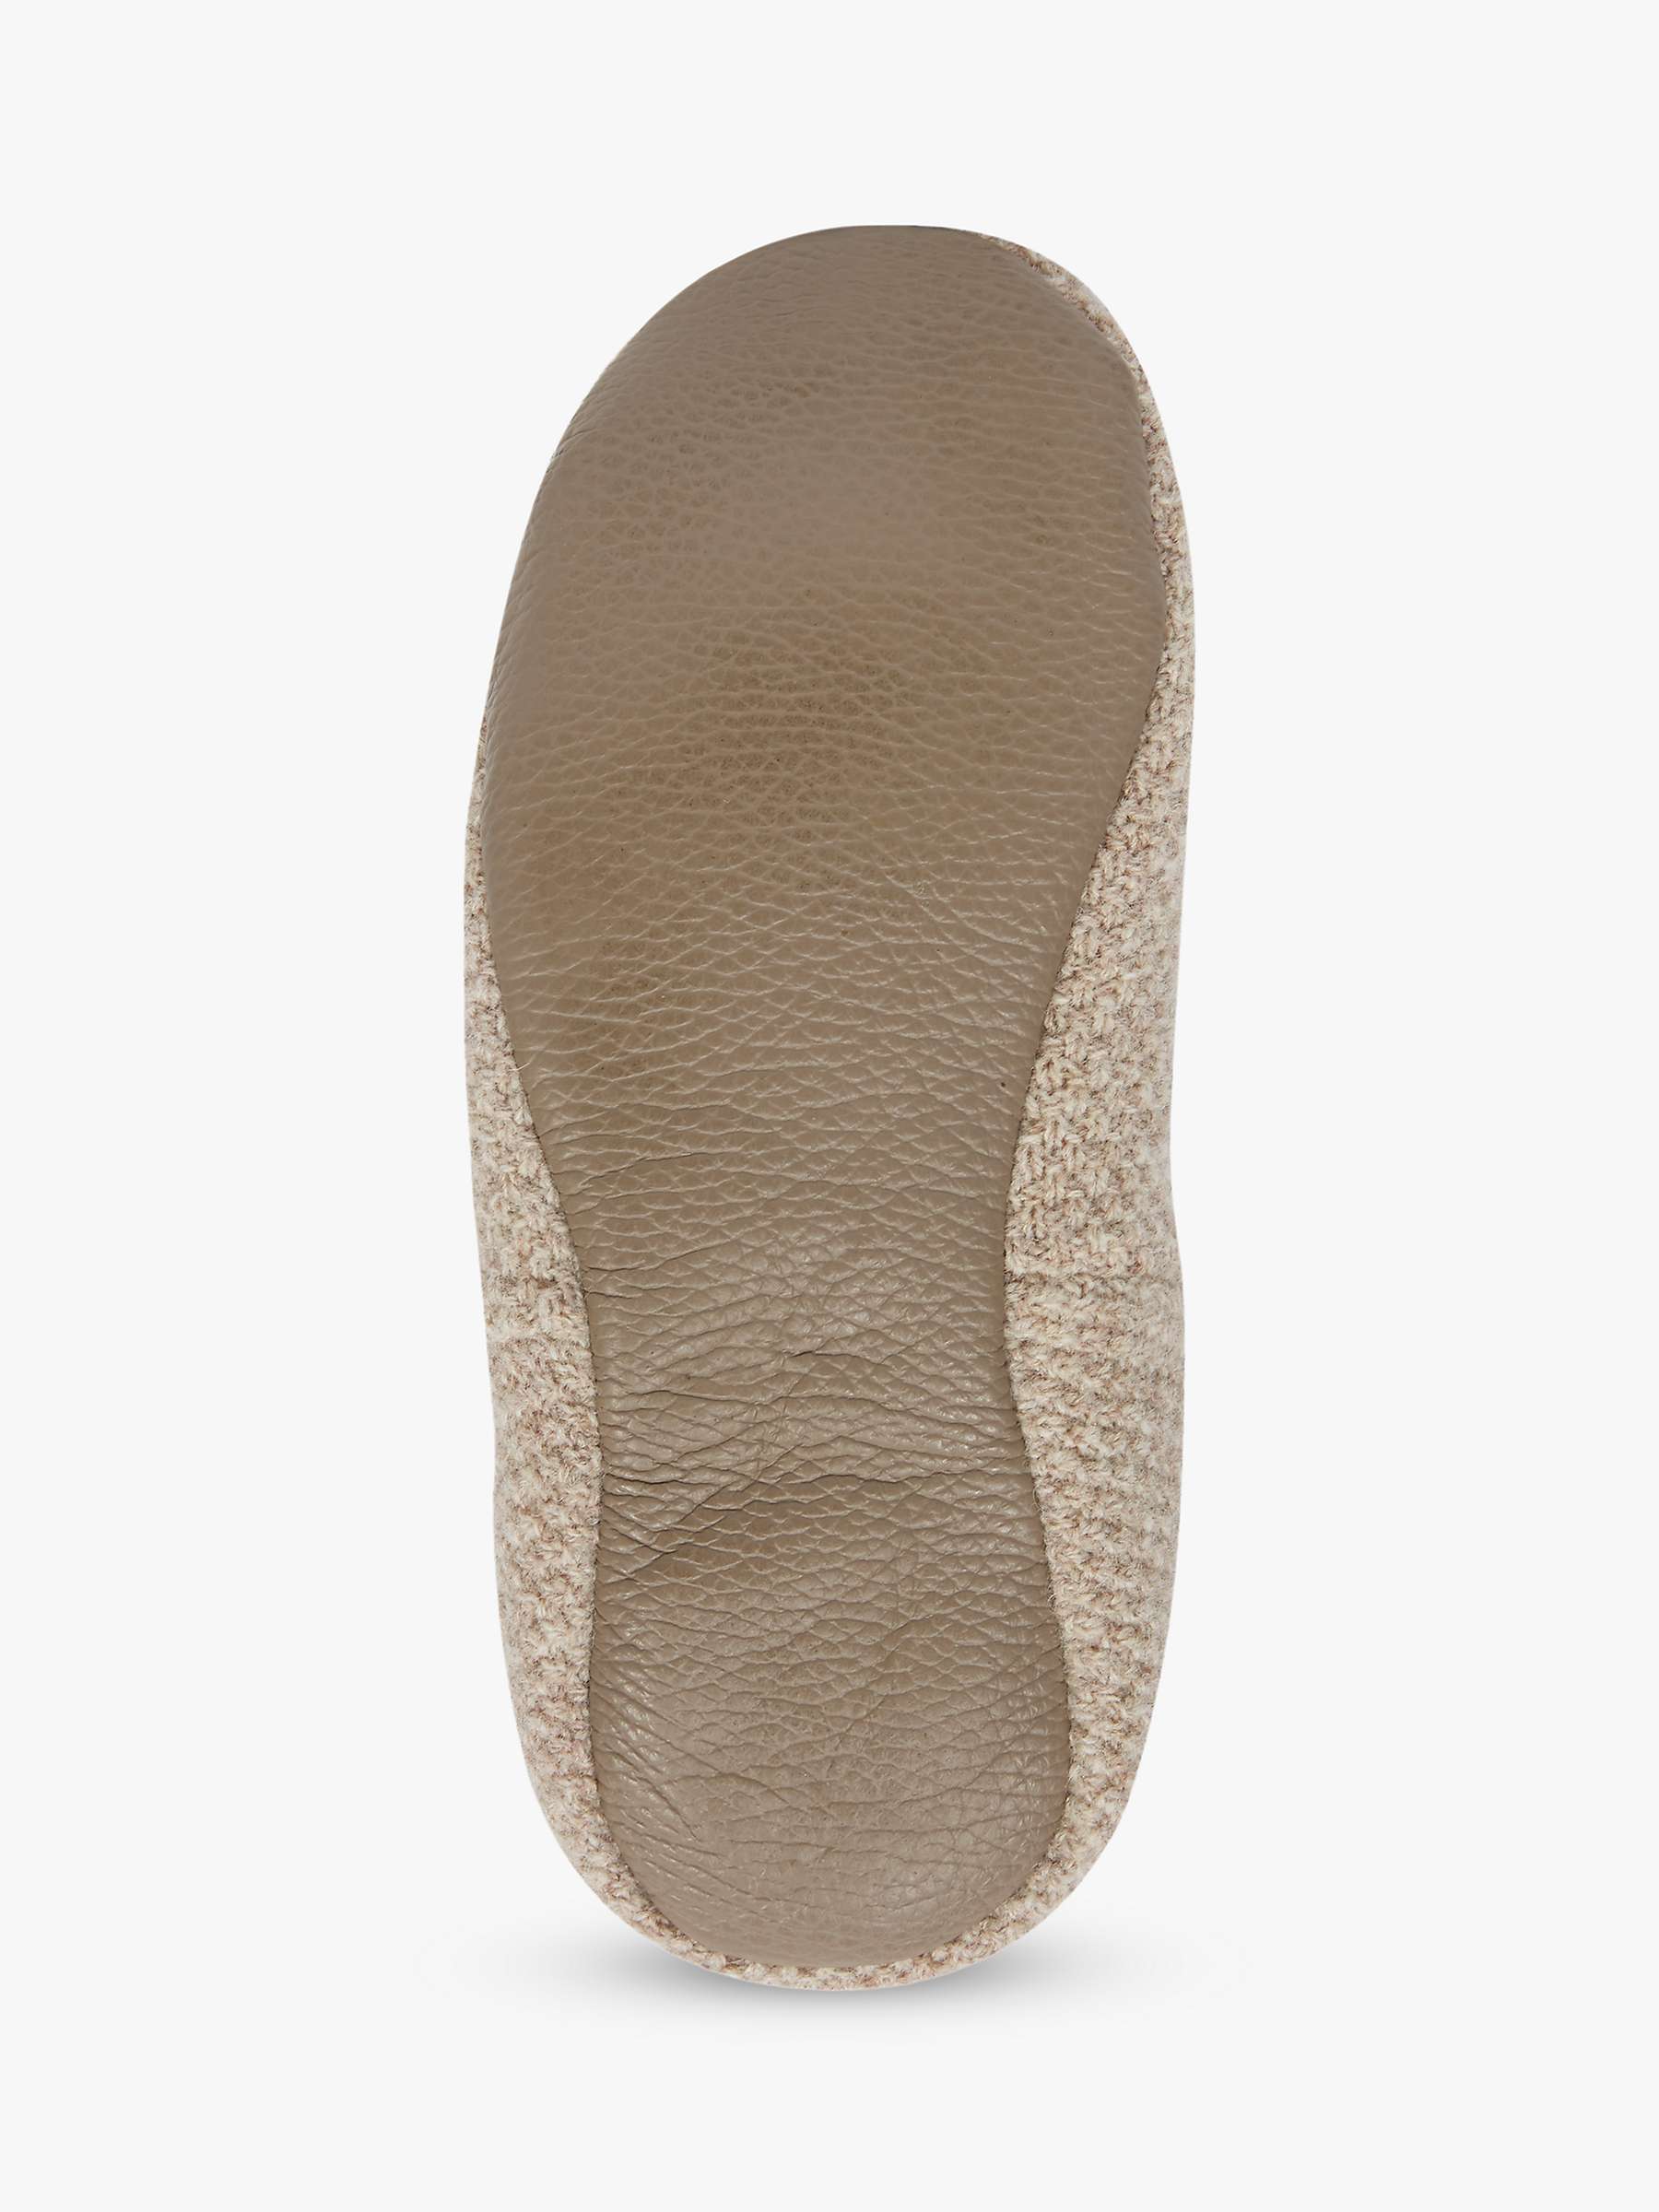 Buy Celtic & Co. Knitted Sheepskin Cocoon Slippers, Oatmeal Online at johnlewis.com